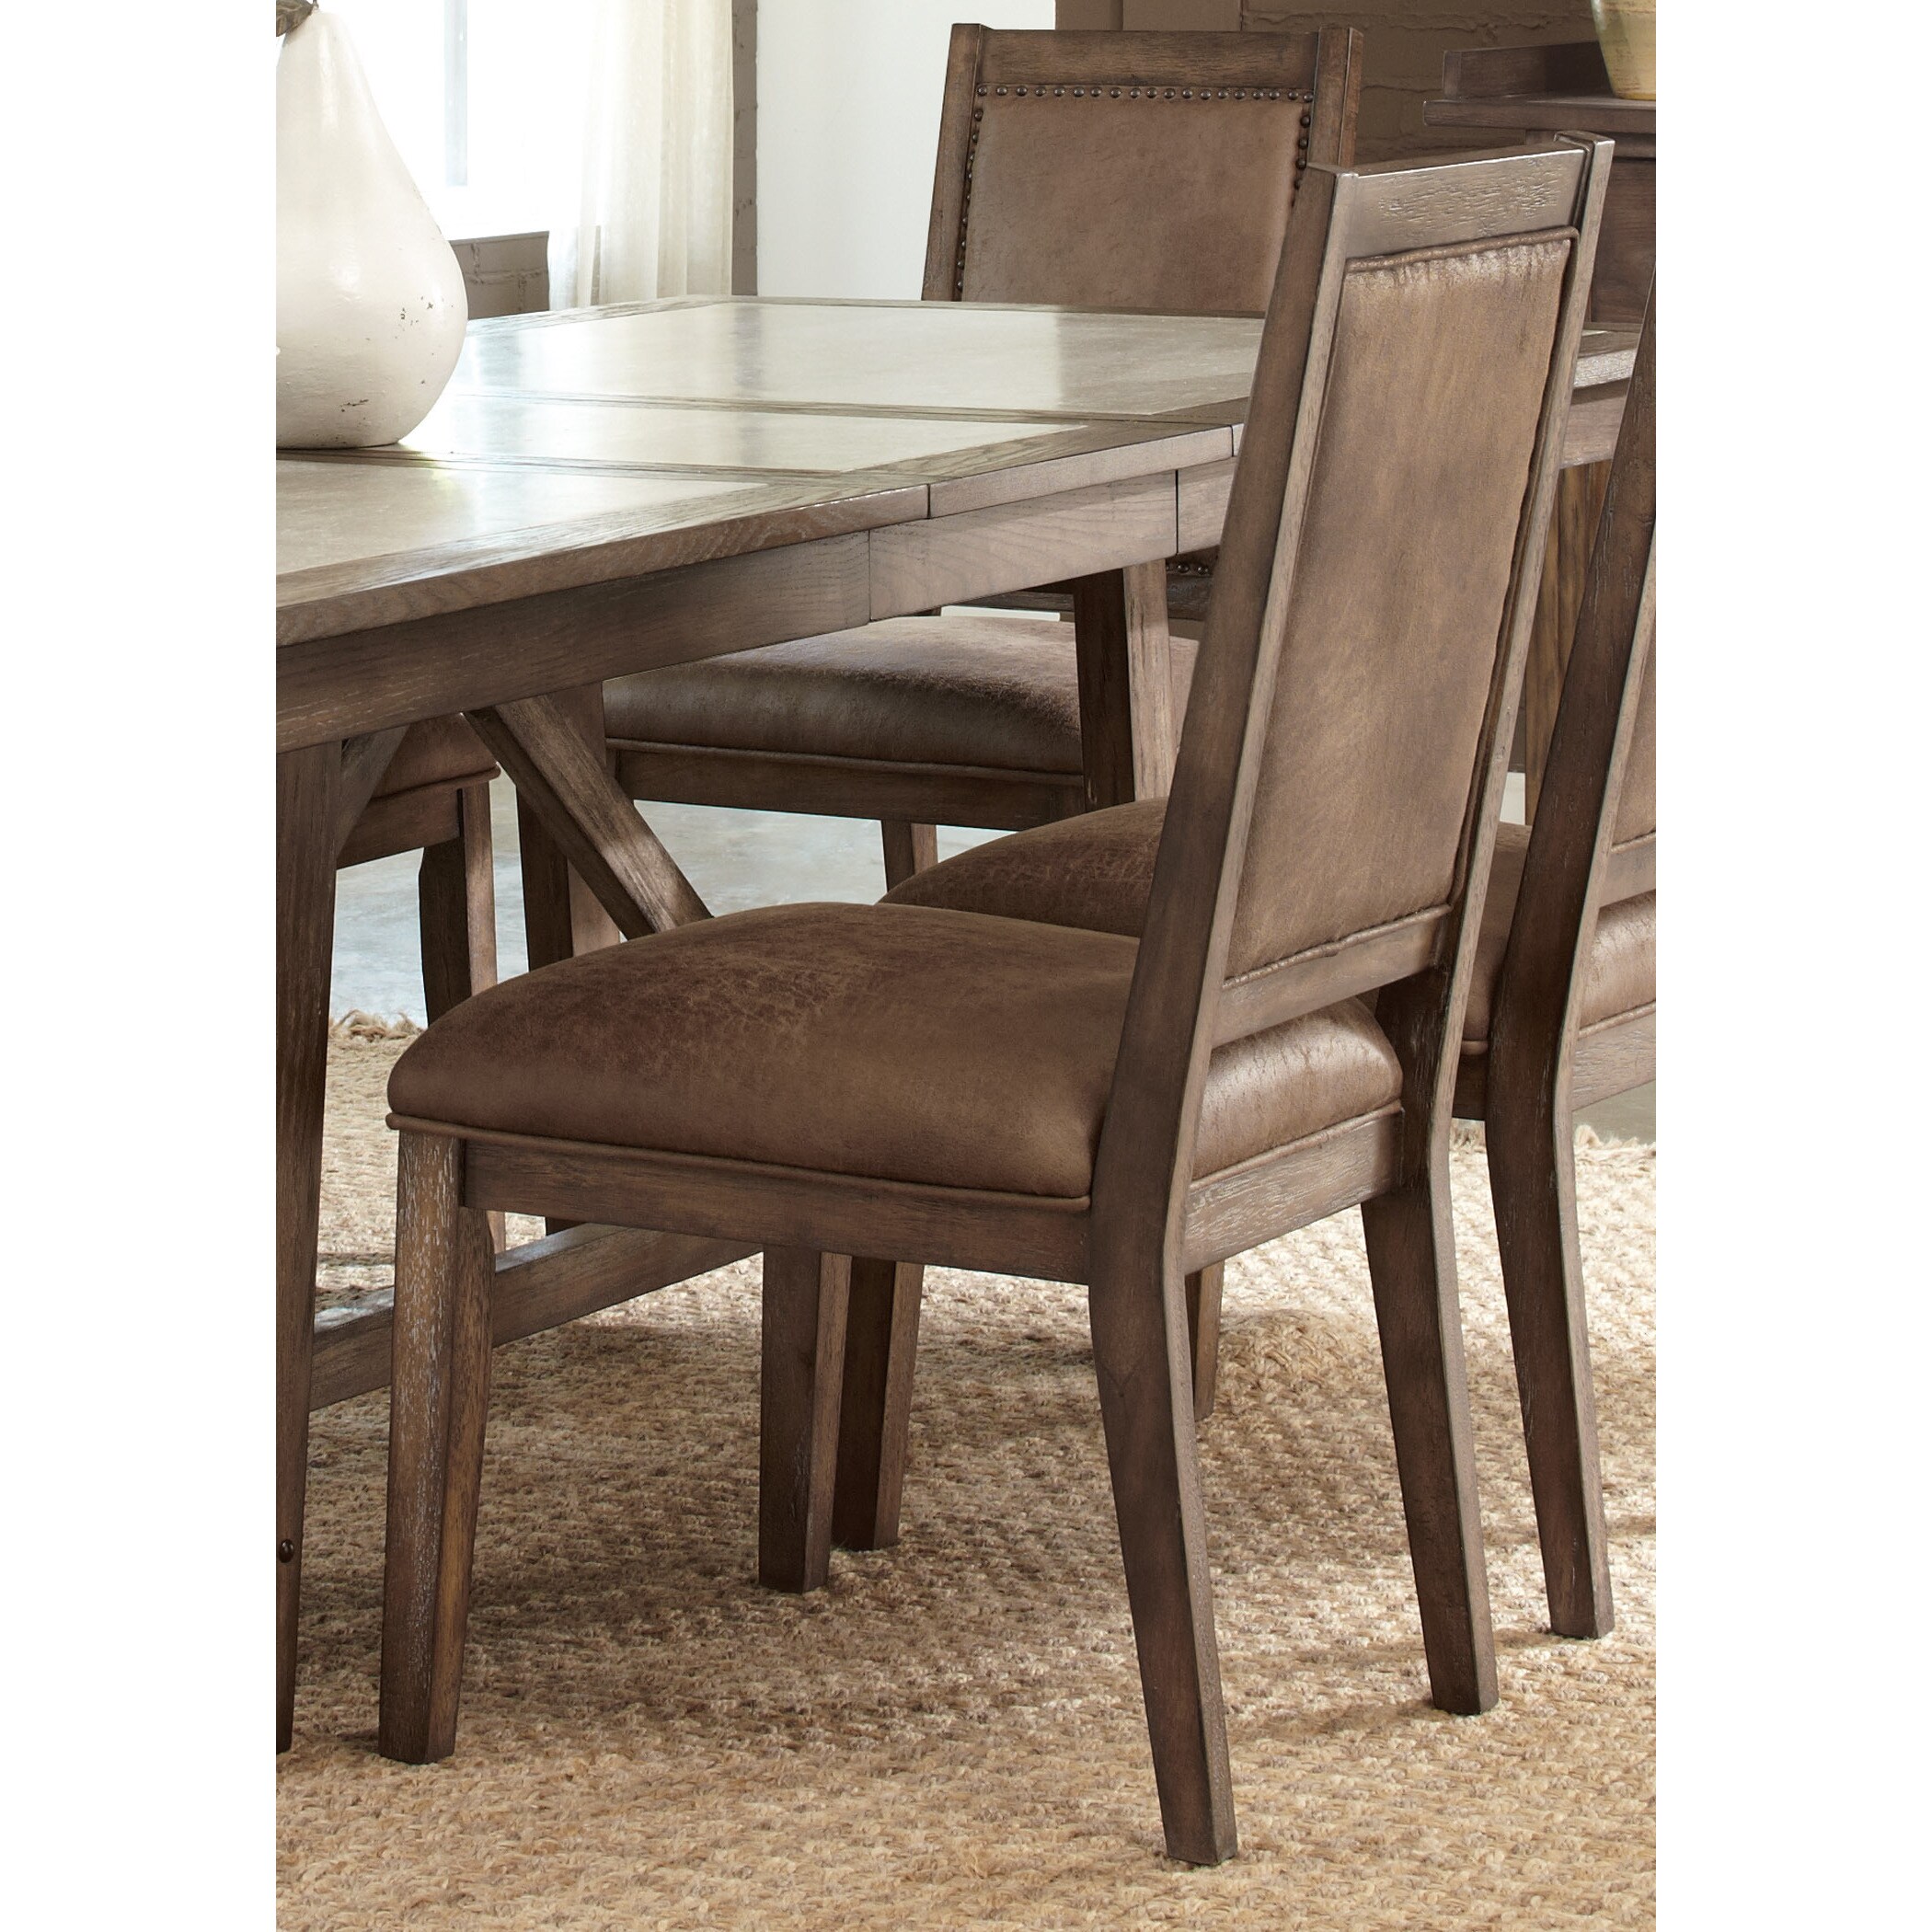 Buy Oak Kitchen Dining Room Chairs Online At Overstock Our Best